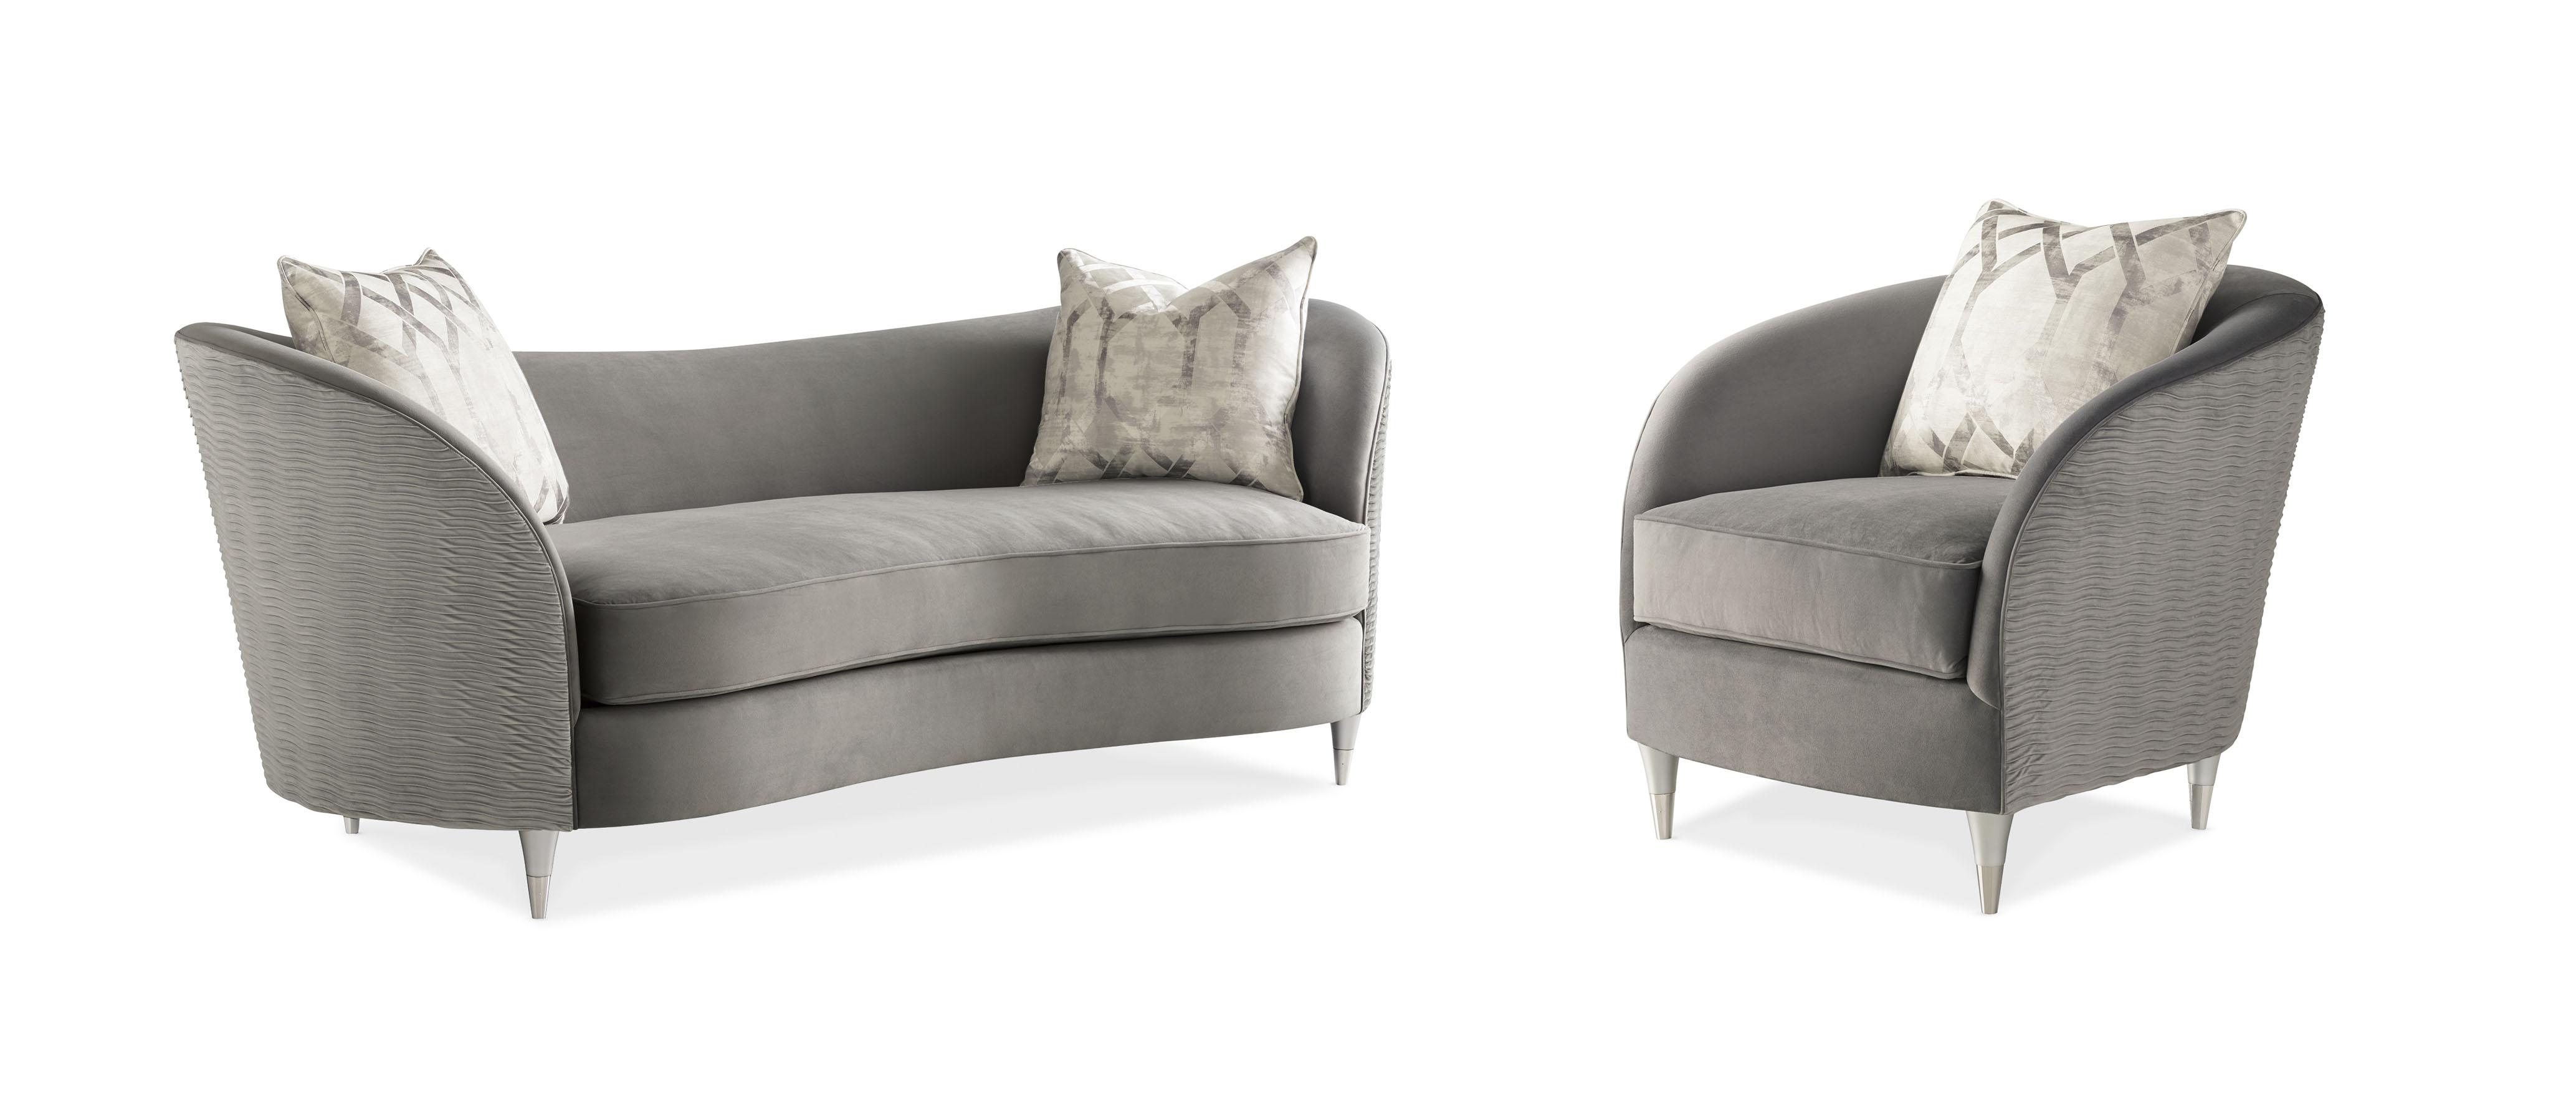 Contemporary Sofa and Chair FARRAH 9260-082-A-Set-2 in Light Grey Fabric